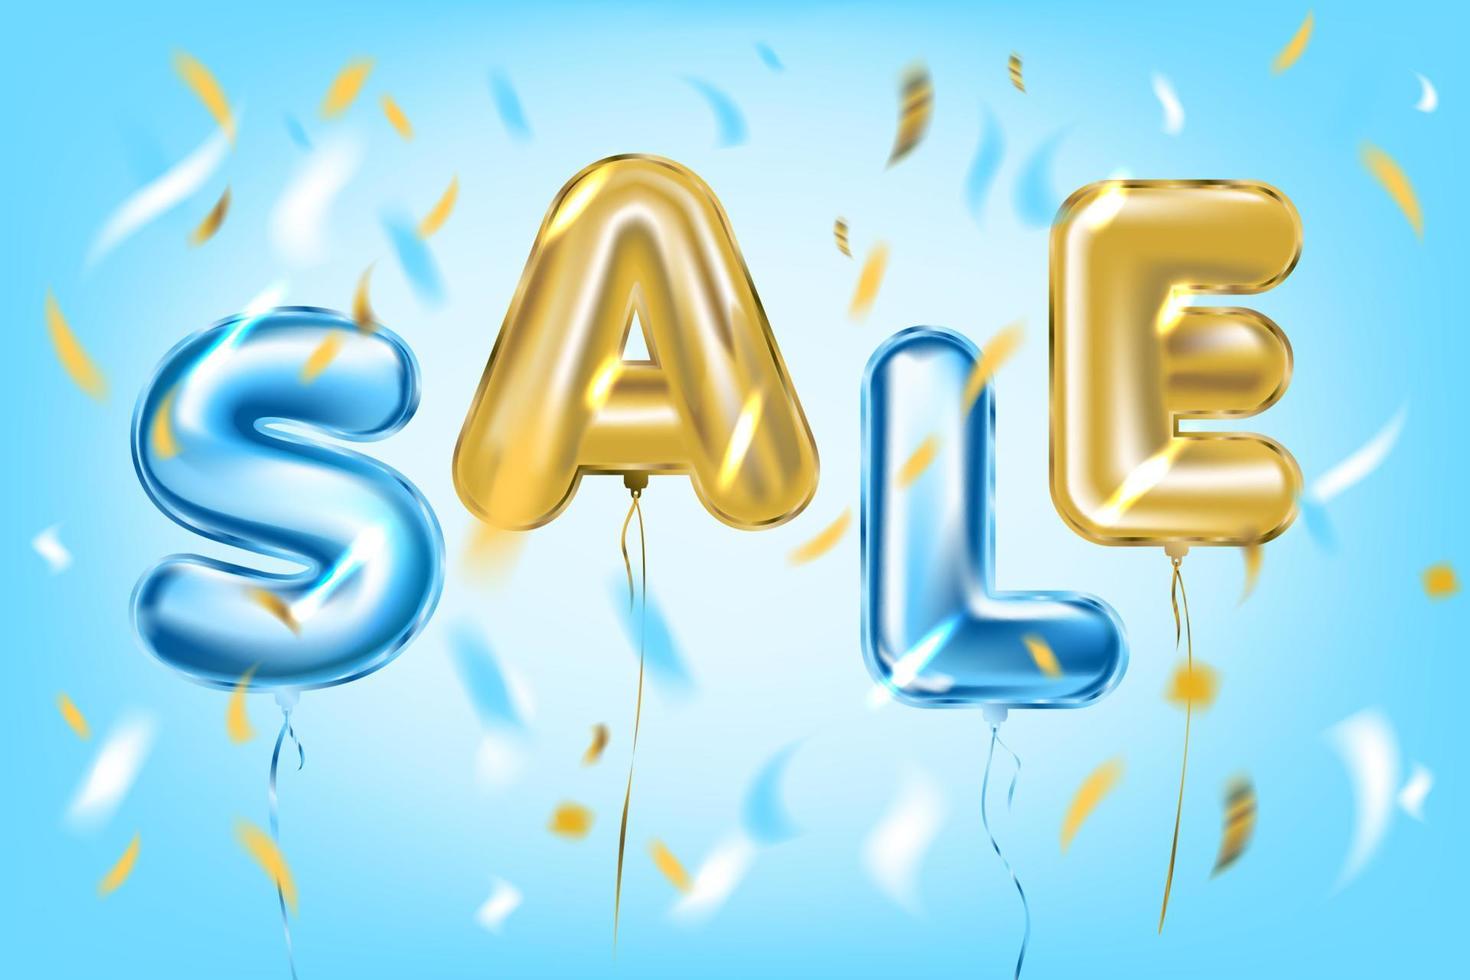 SALE POSTER by metallic foil ballons in air vector